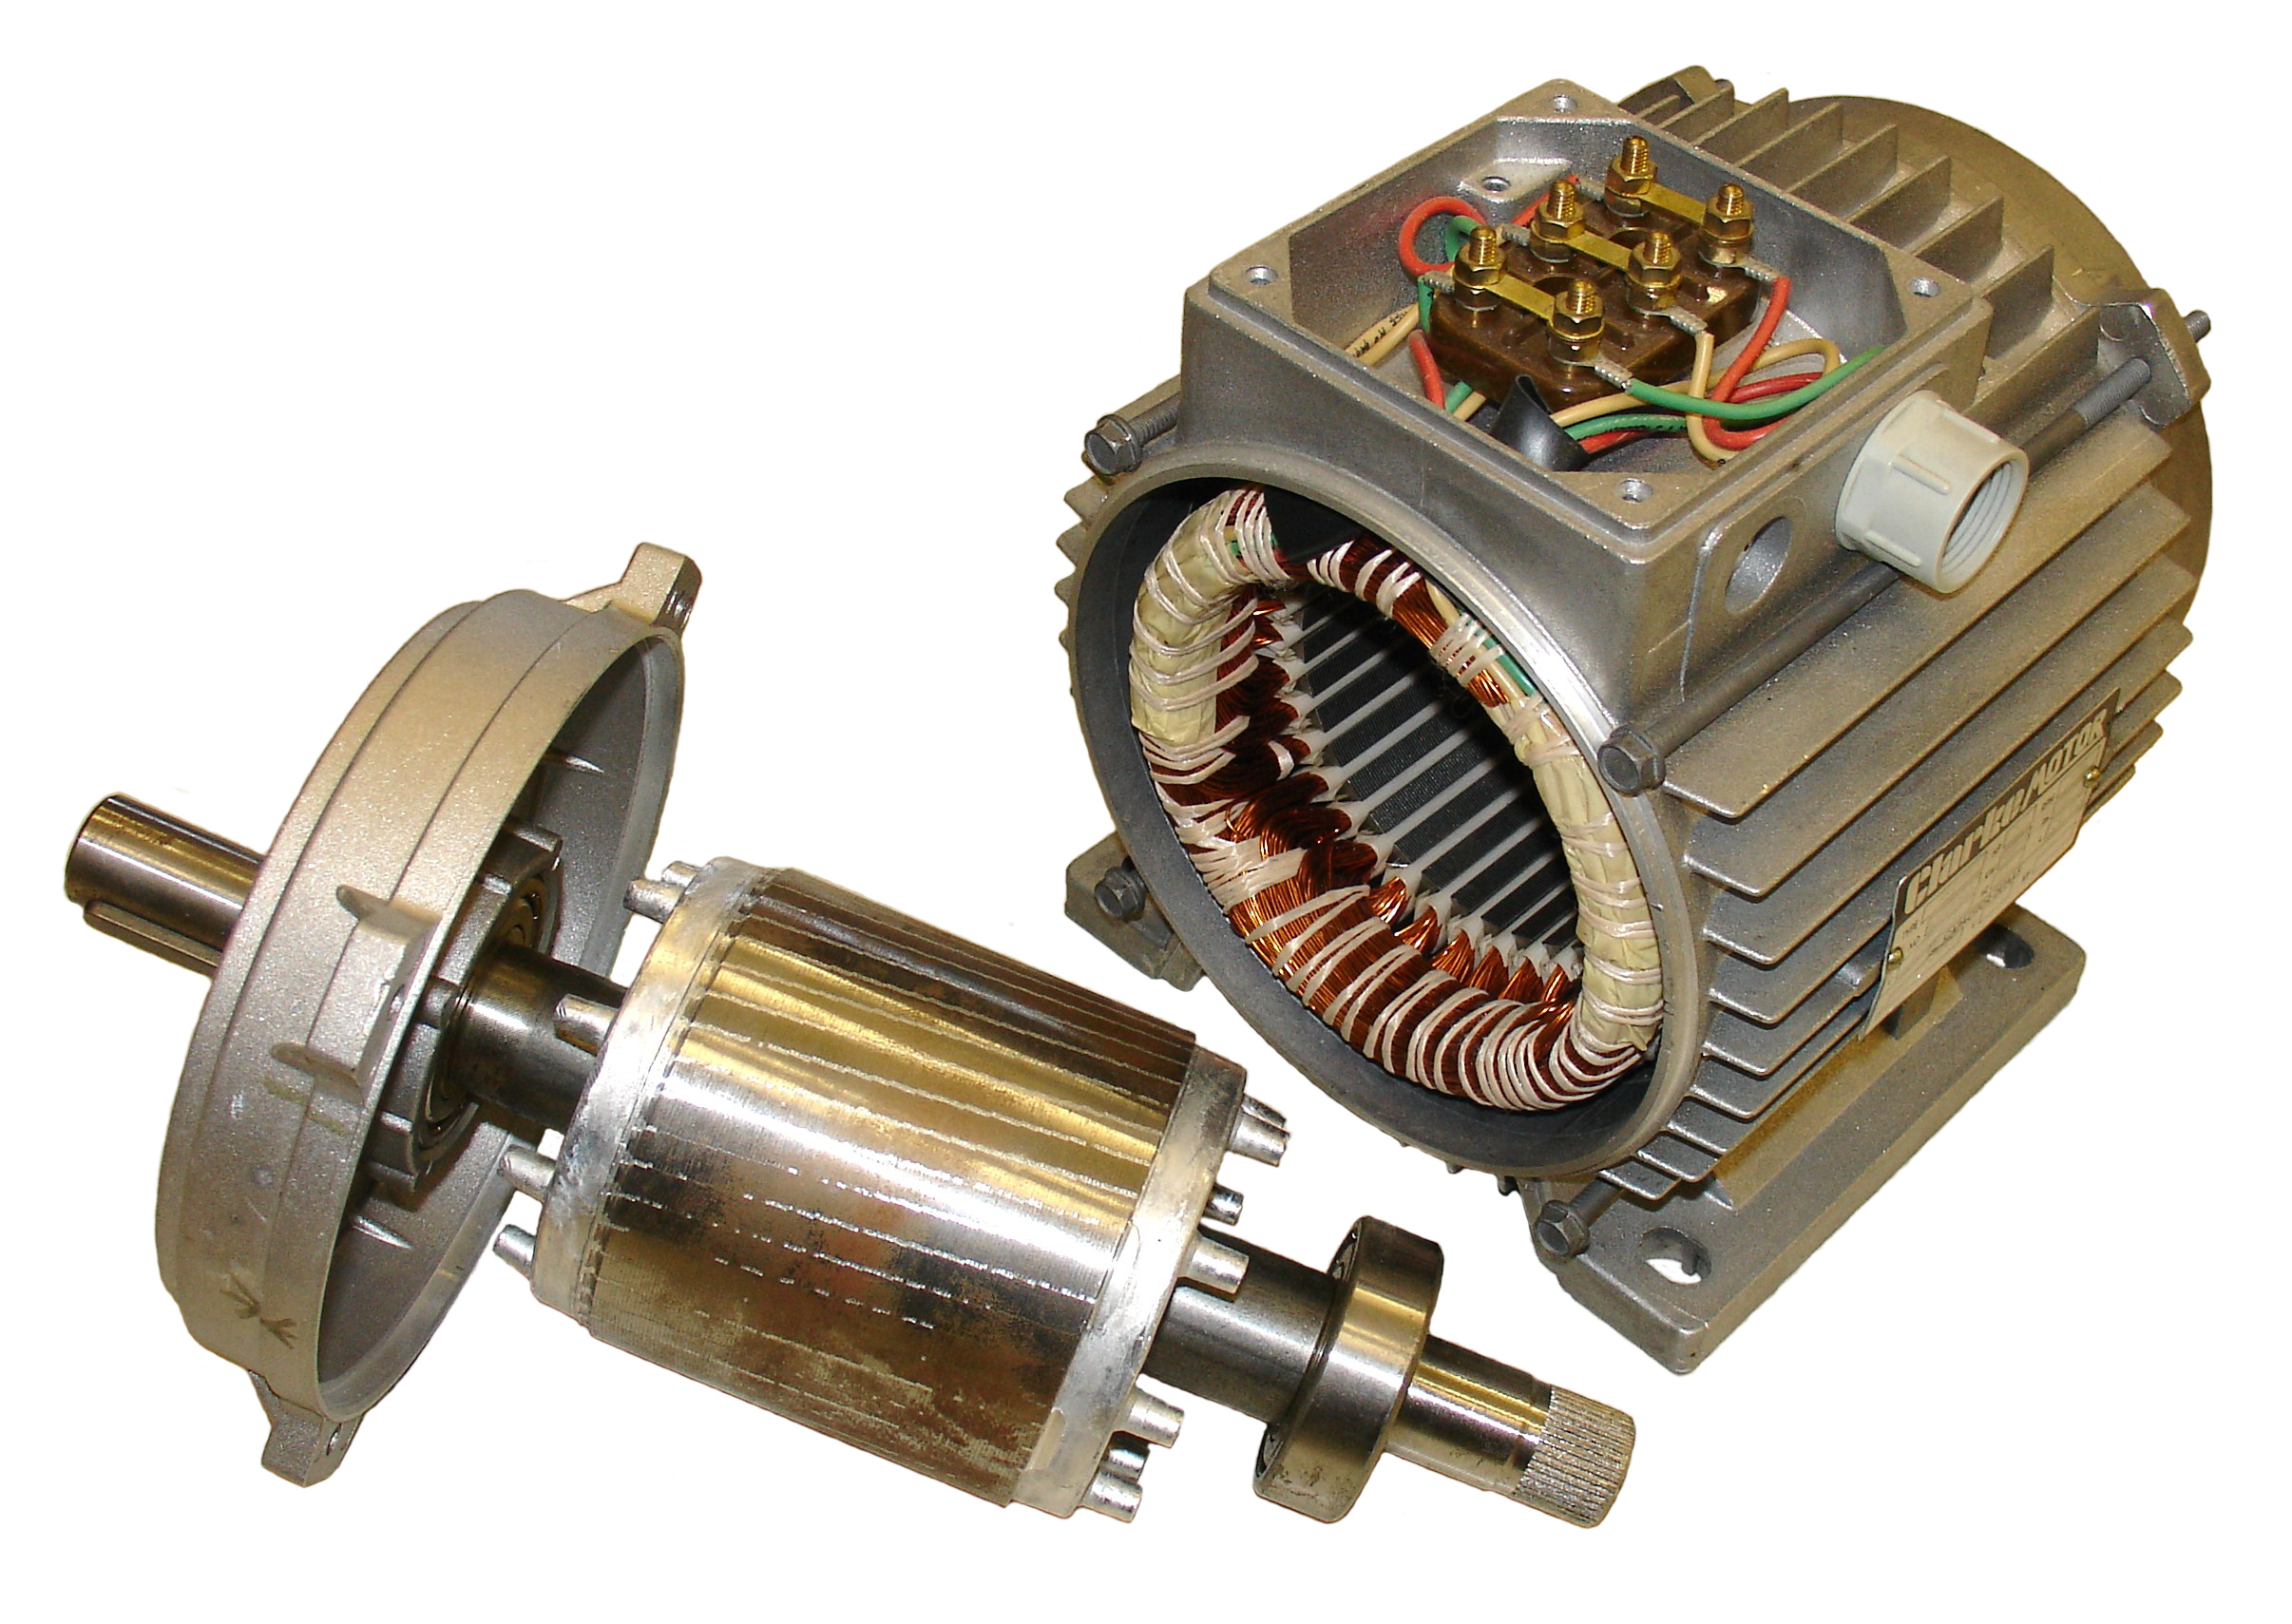 stator_and_rotor_of_induction_motor_magnetica.jpg